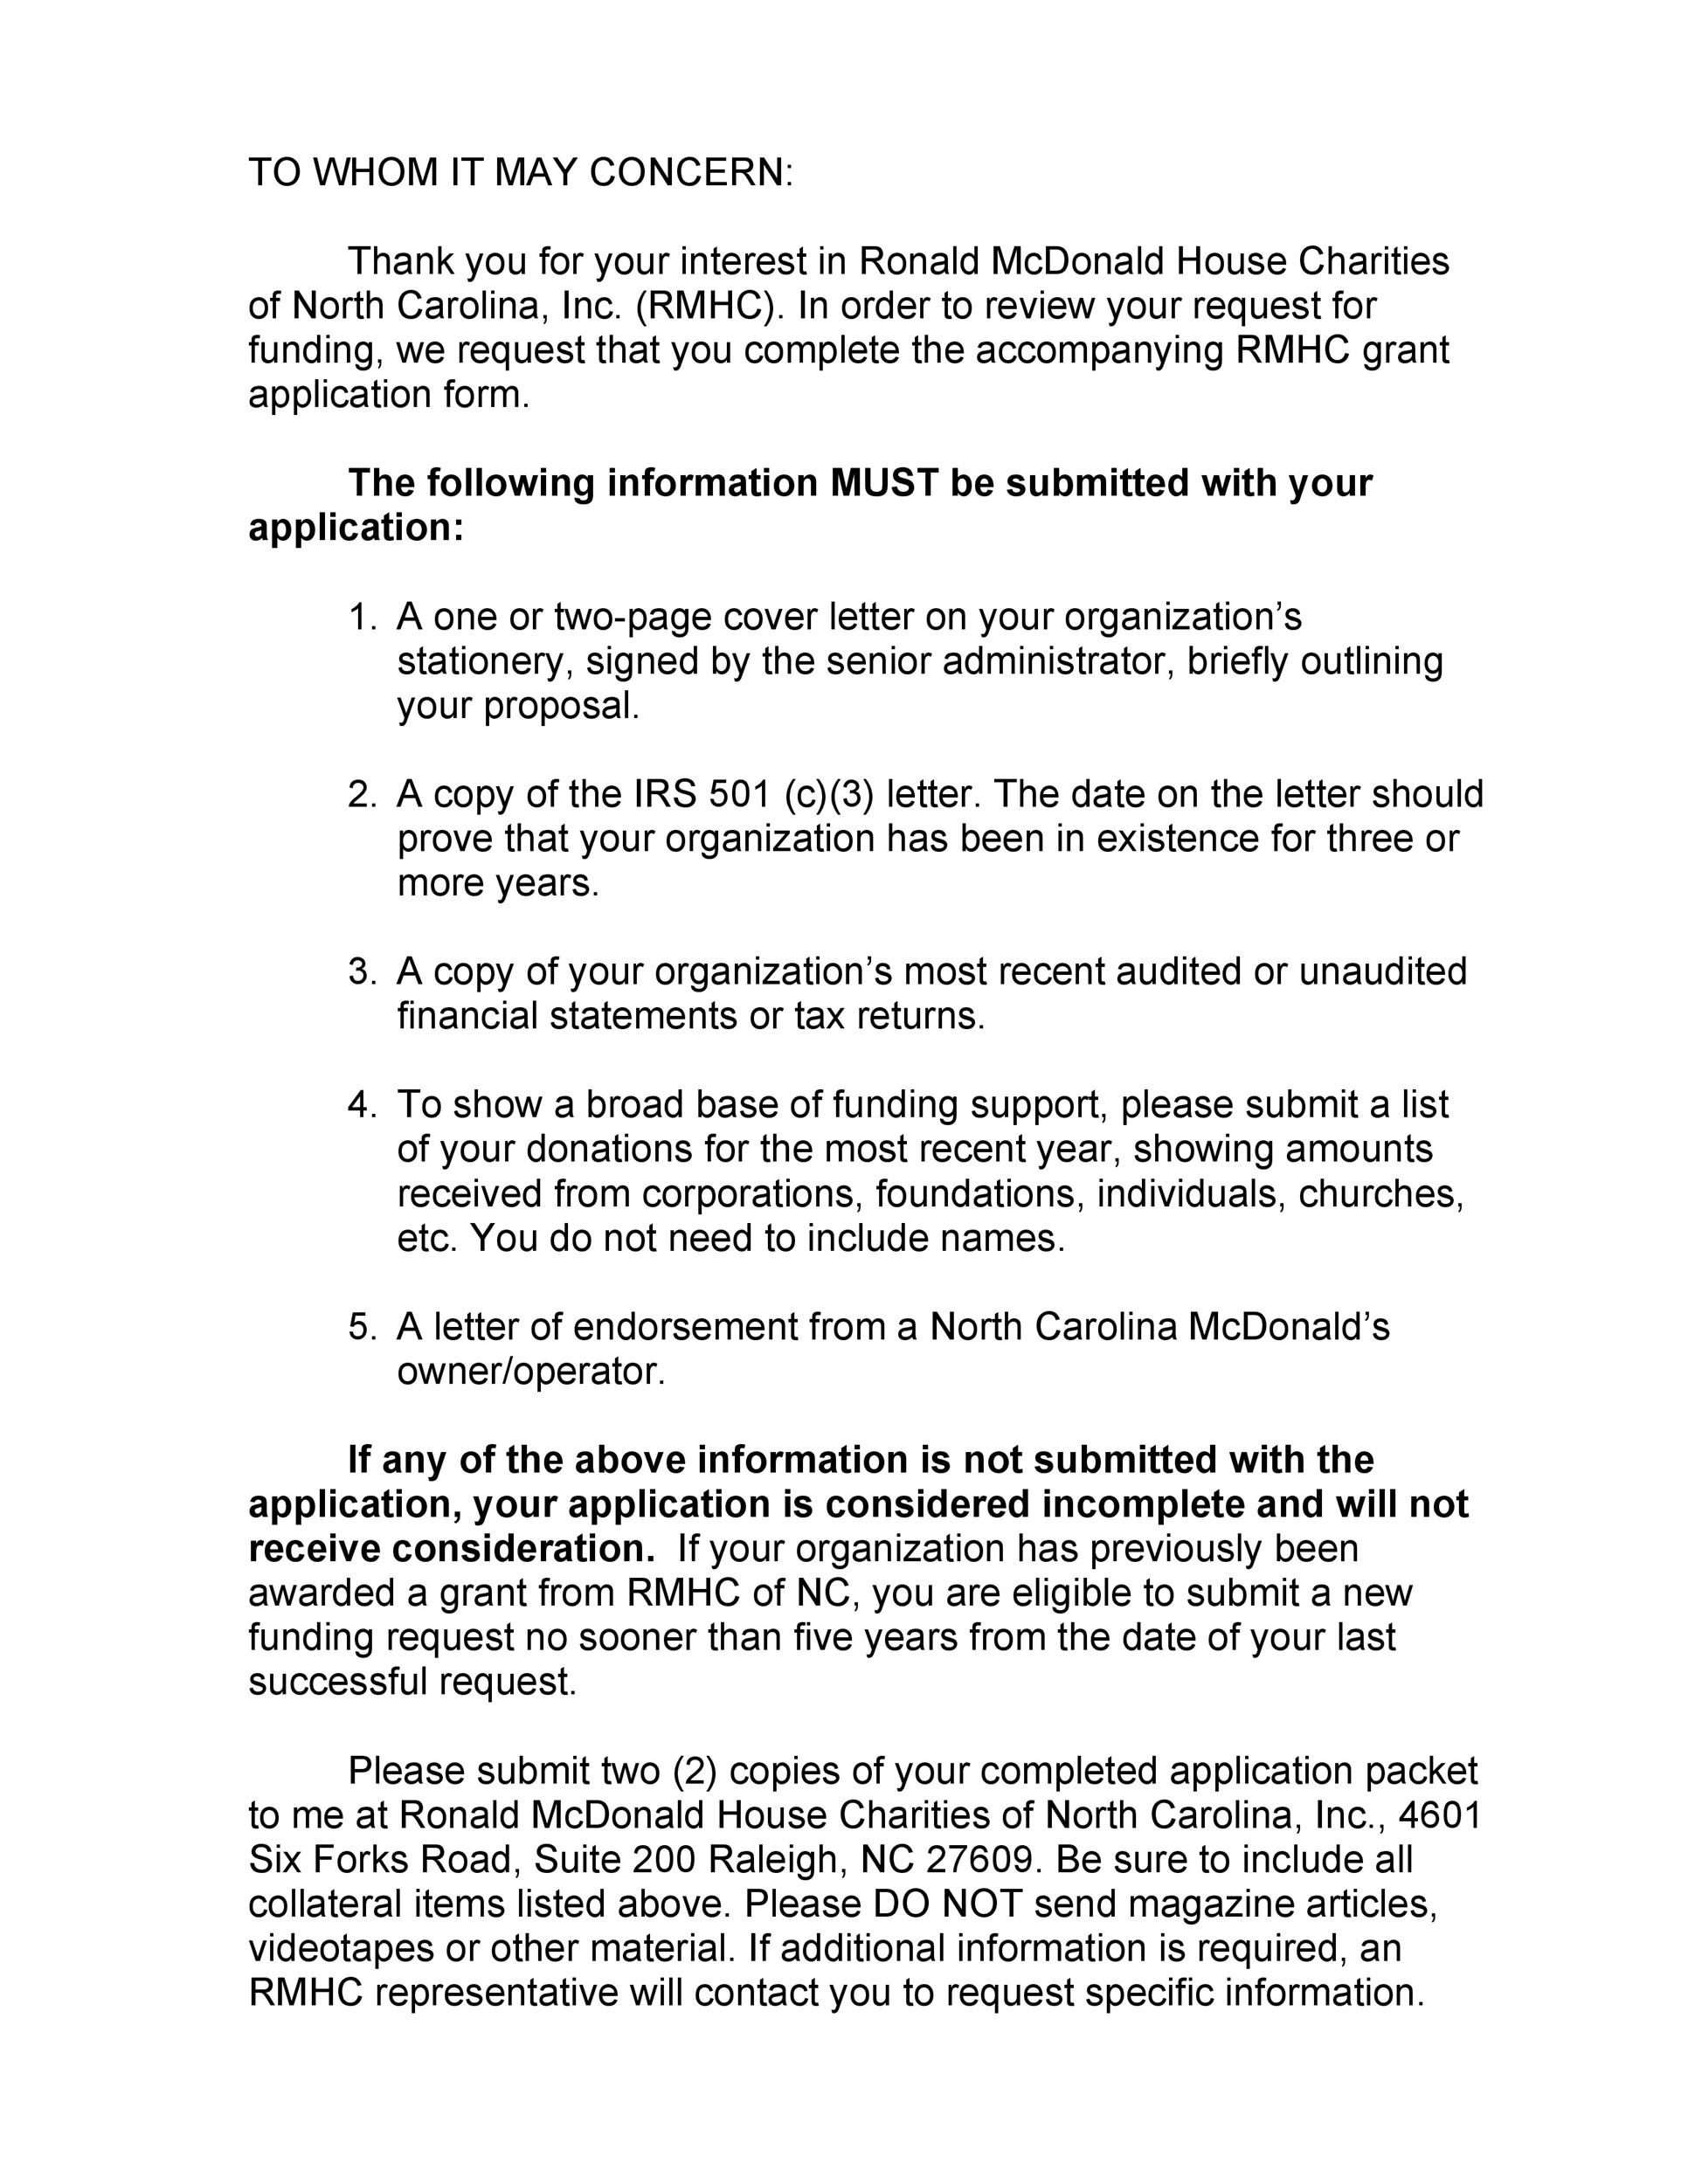 To Whom It May Concern Capitalization Cover Letter from templatelab.com